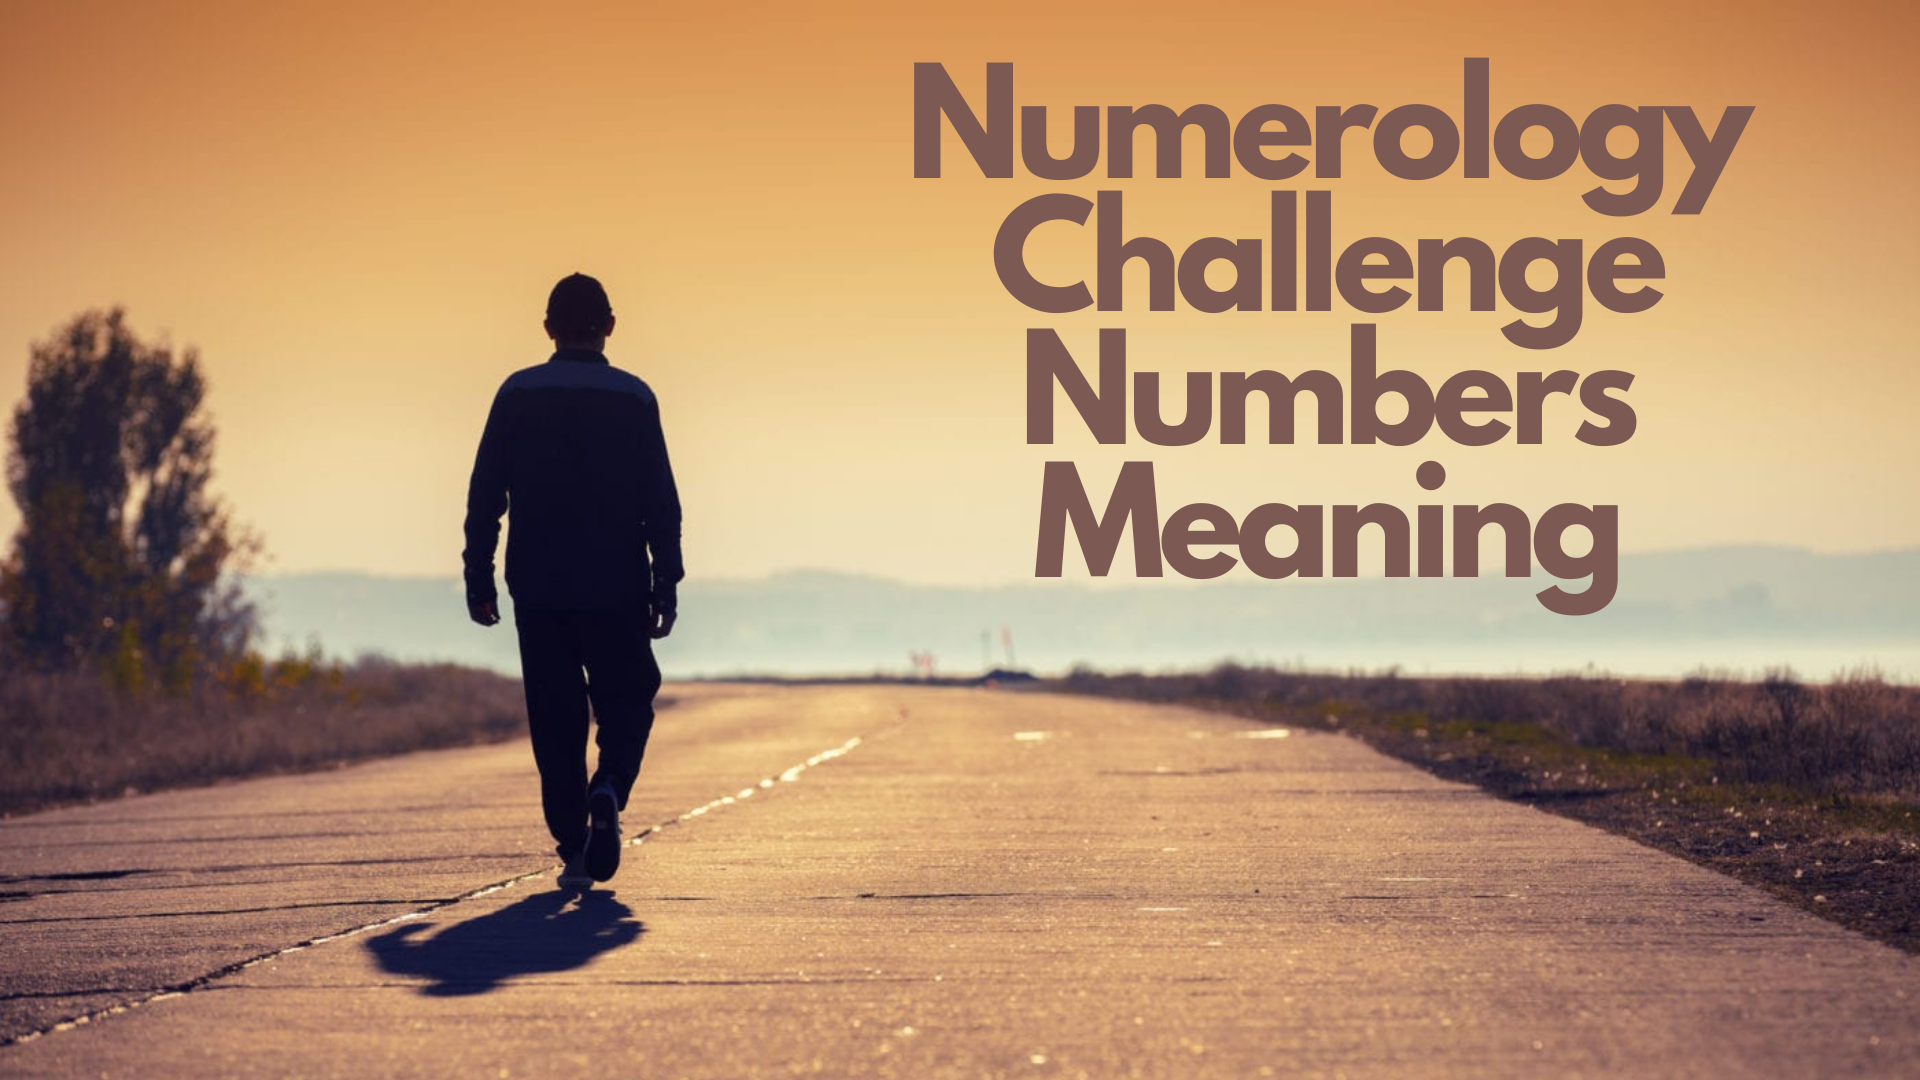 A man walking on the road with words Numerology Challenge Numbers Meaning